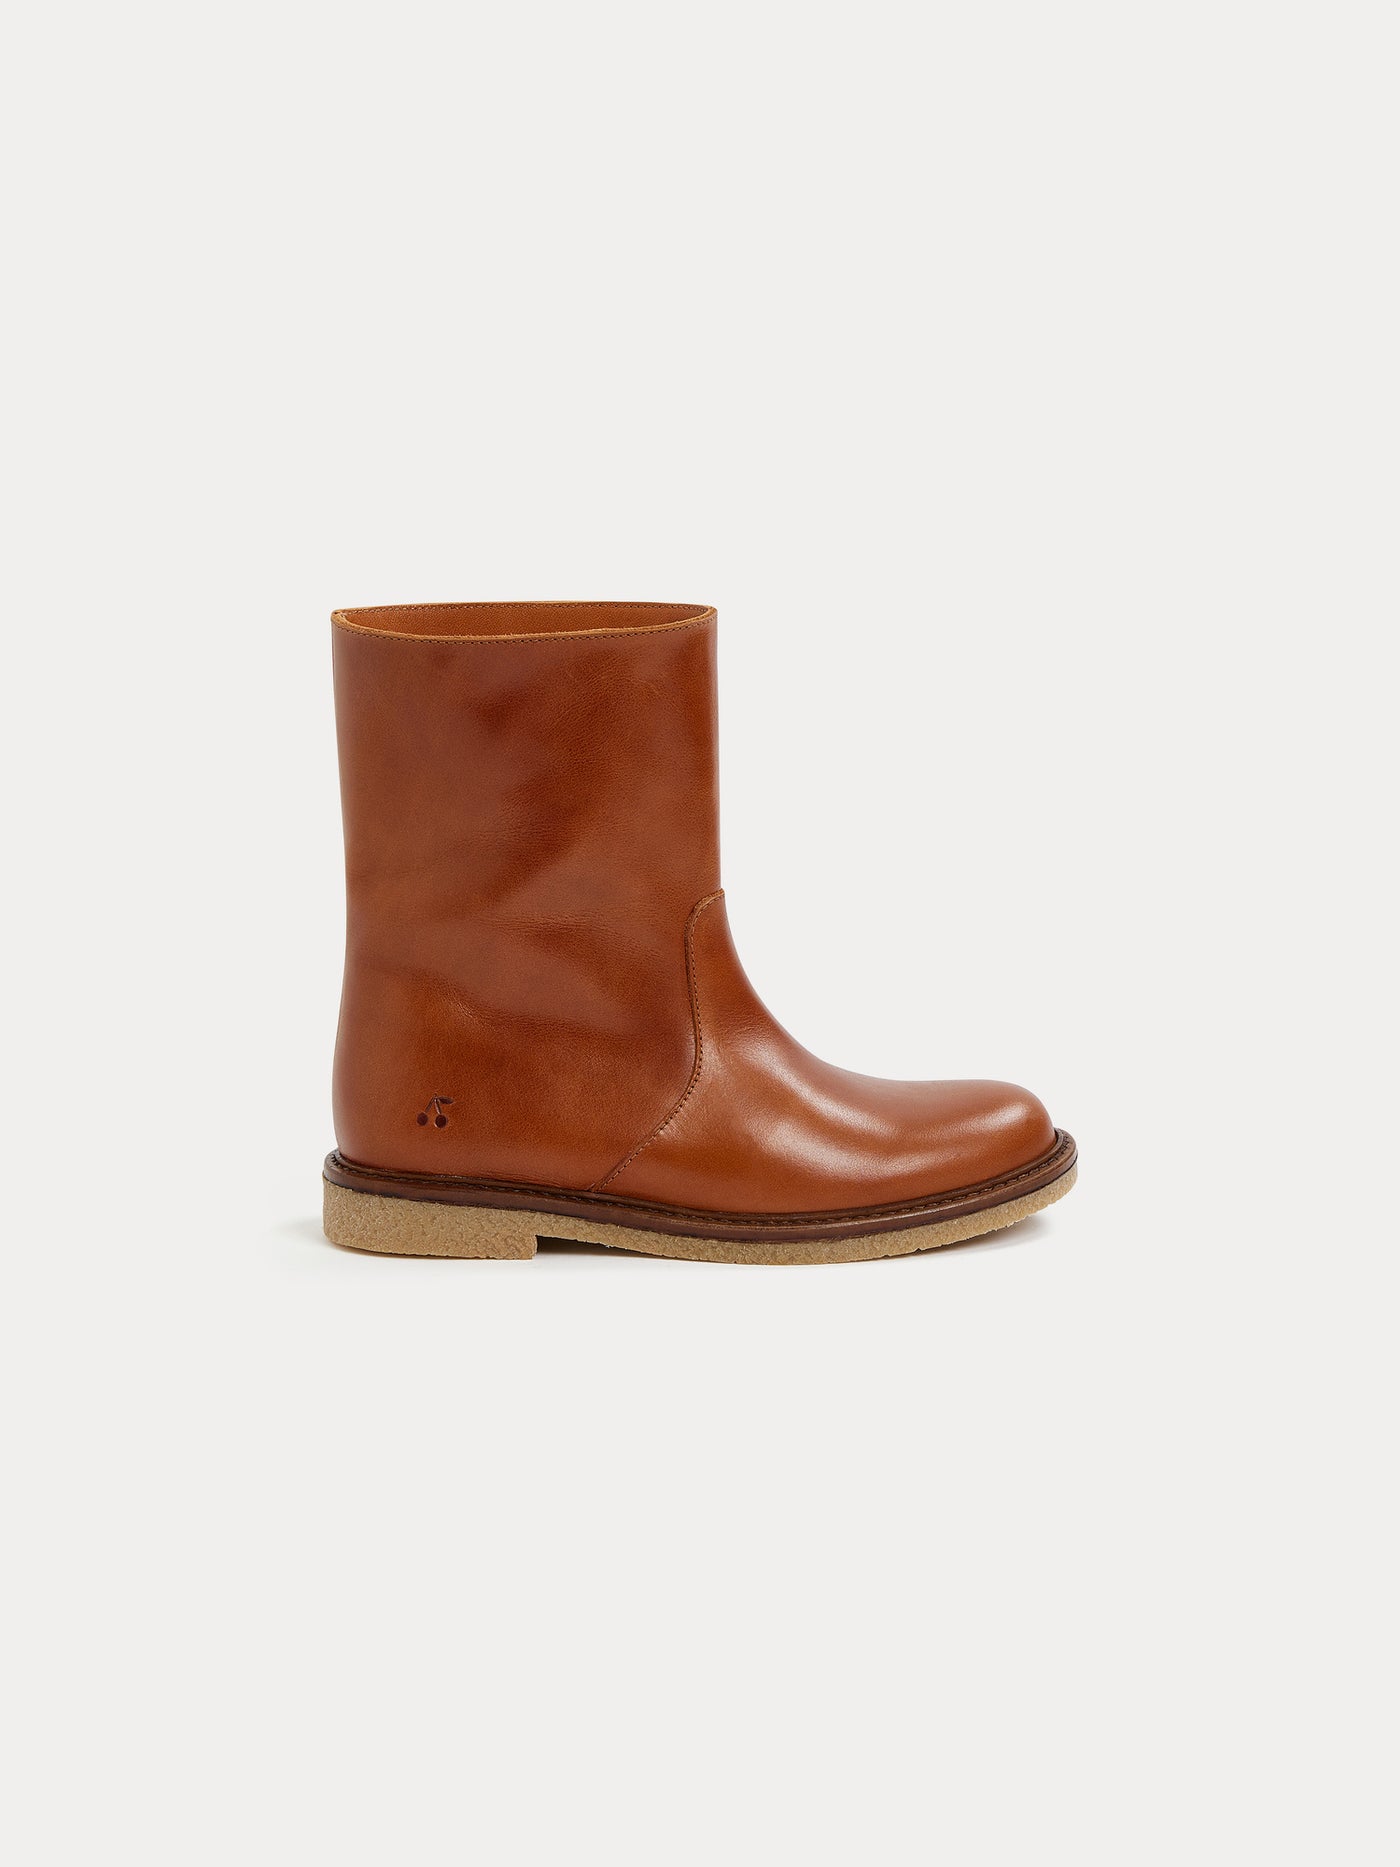 Wild Ankle Boots caramel